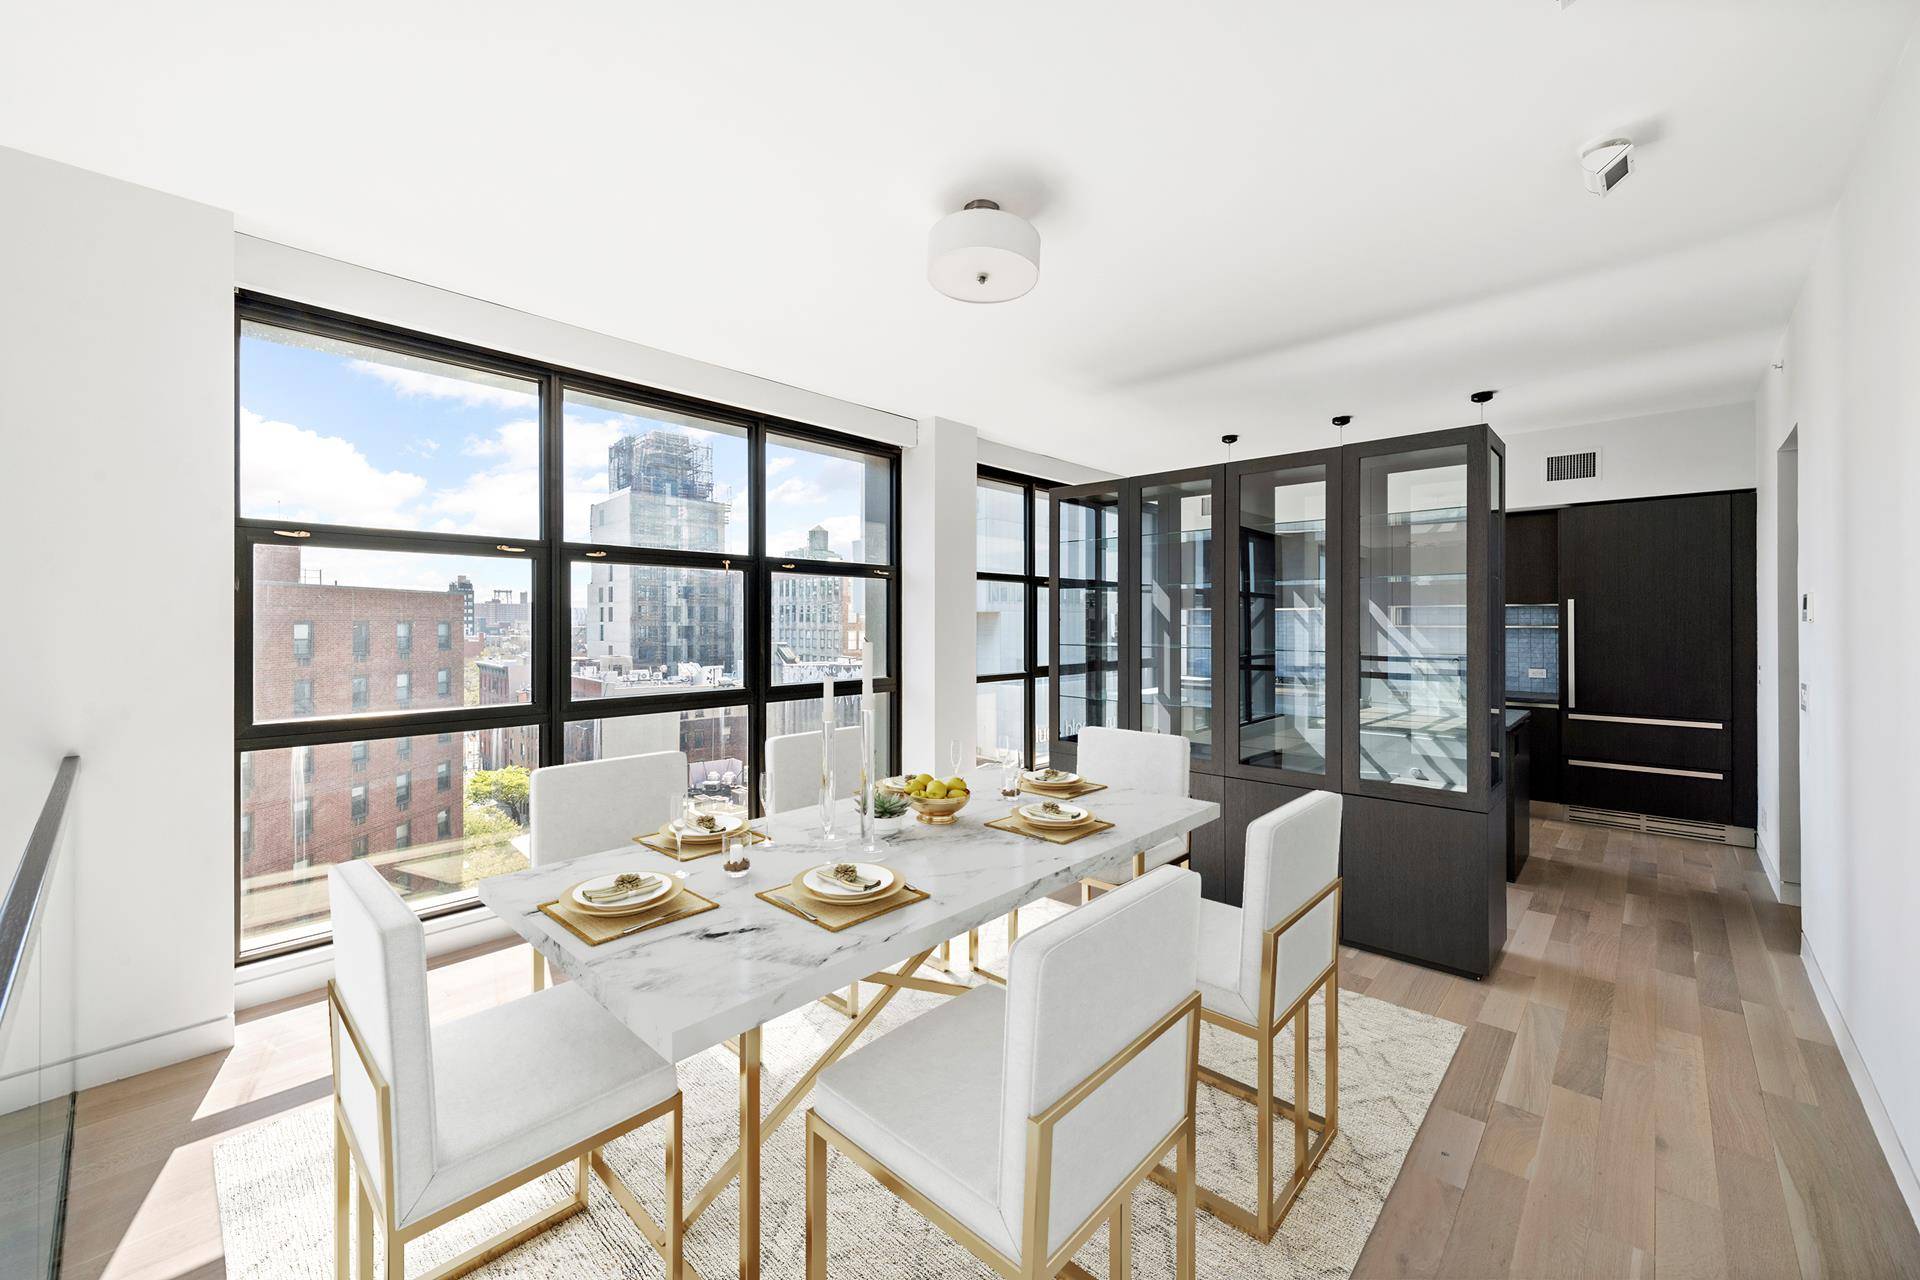 This 2 bedroom, 2. 5 bathroom penthouse at 250 Bowery spans 2, 387 sq.